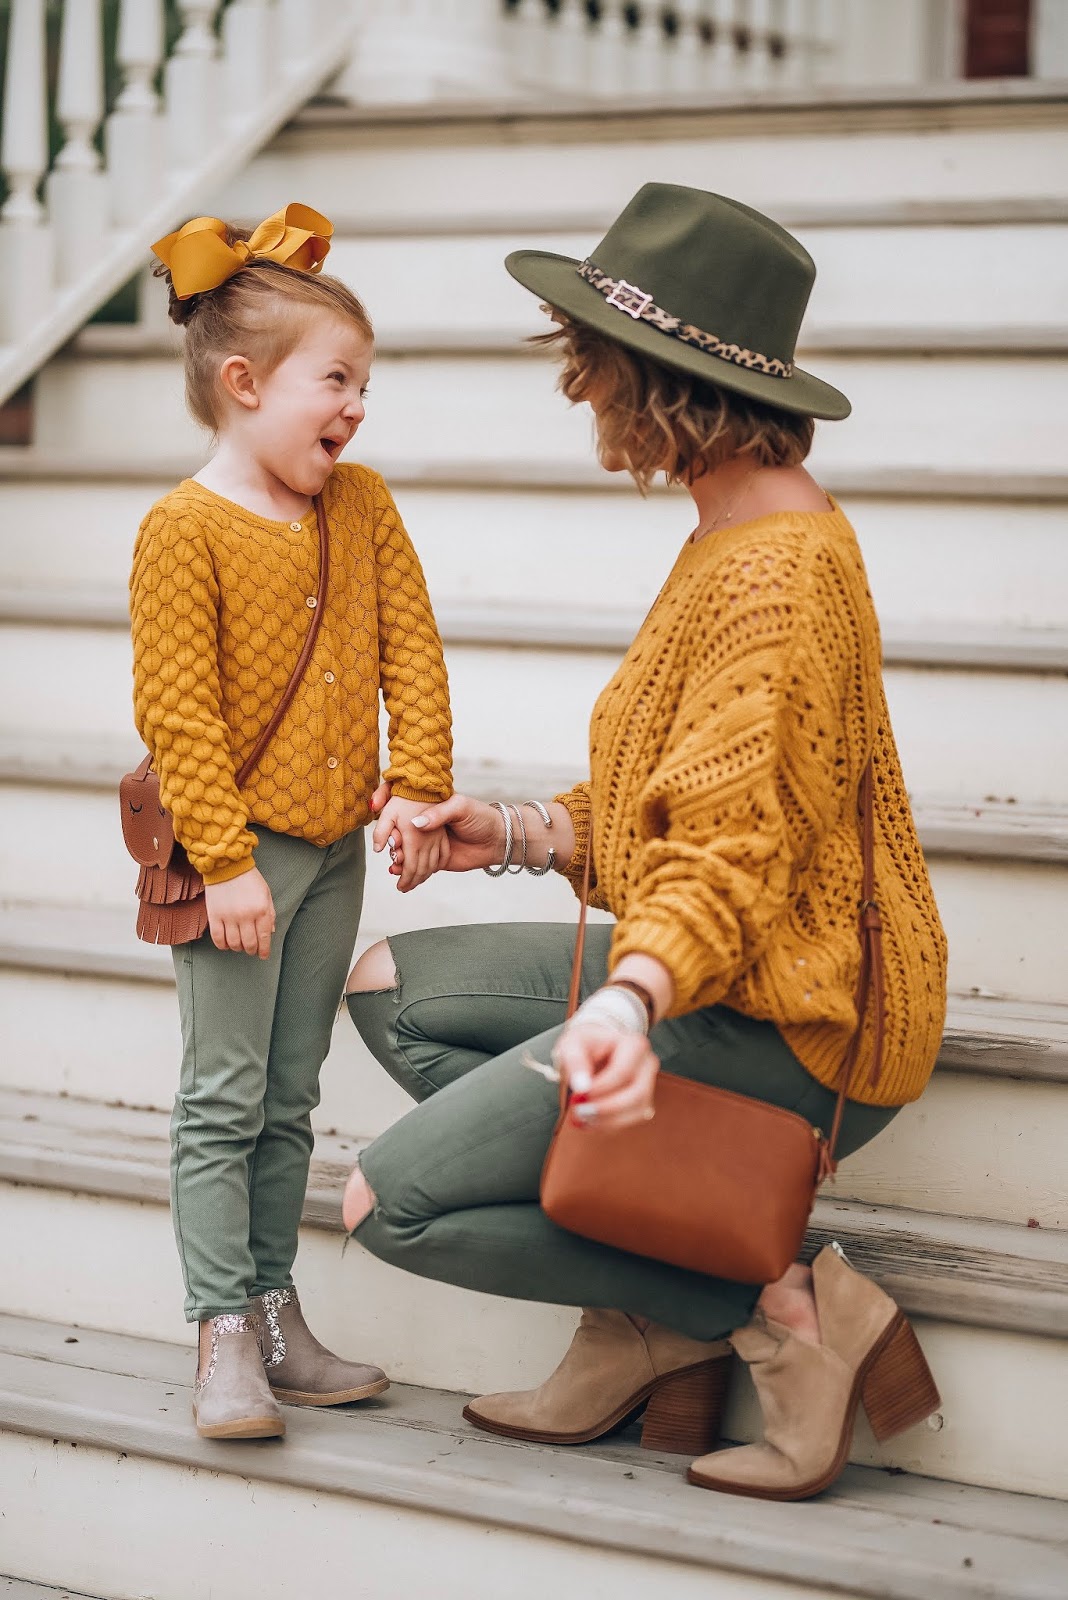 Mustard Yellow Paired With Olive Green For Fall - Affordable Style - Something Delightful Blog #fallstyle